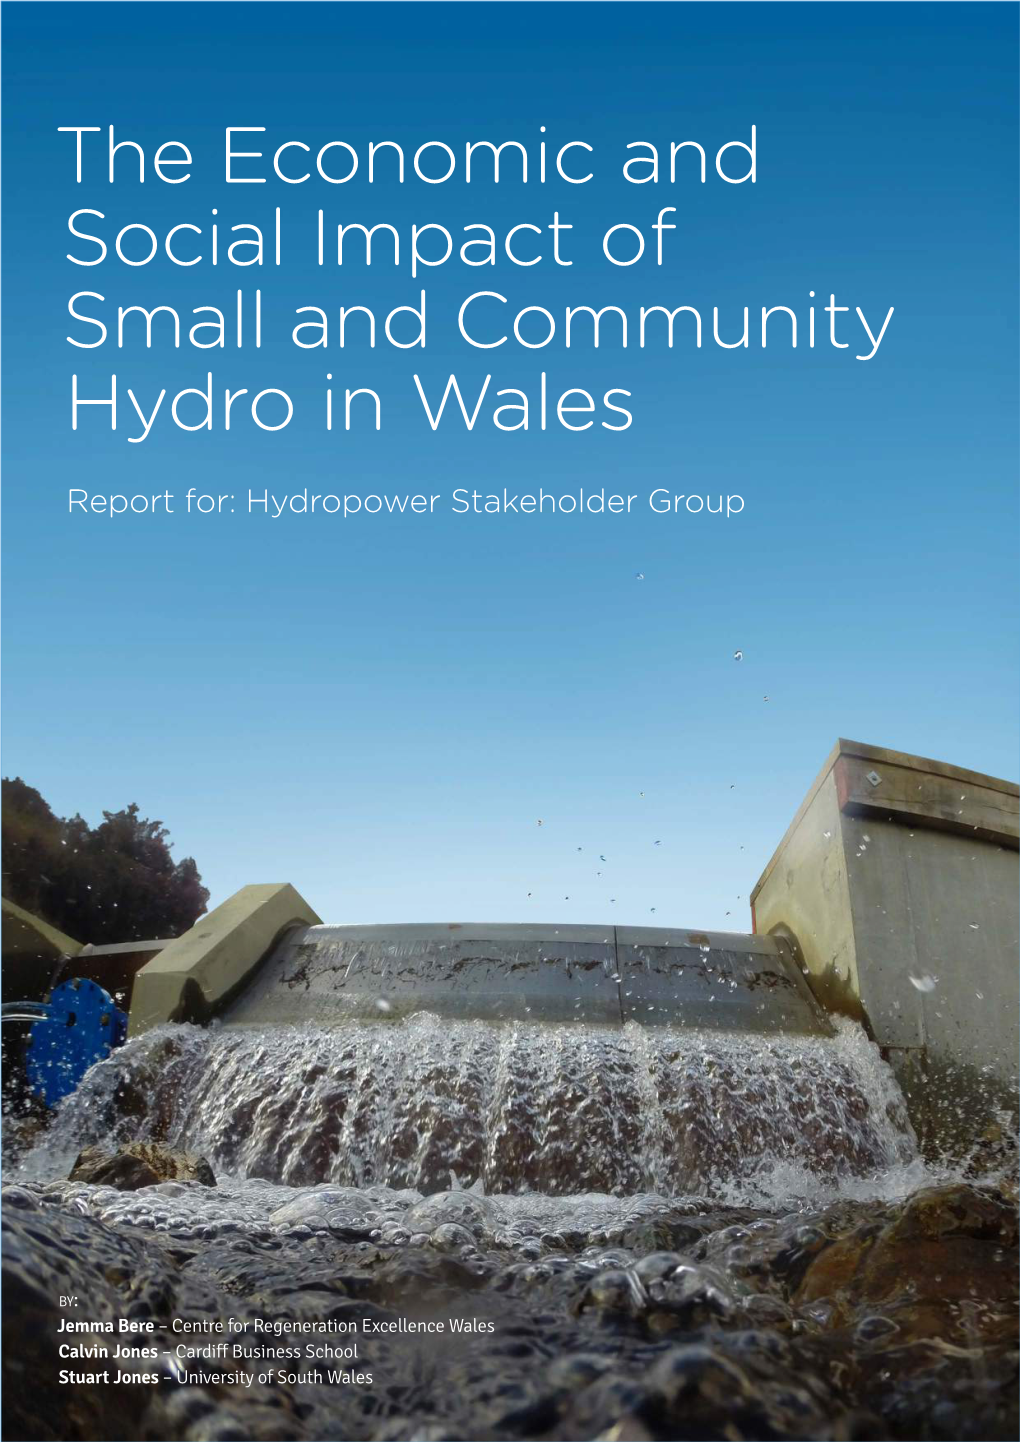 The Economic and Social Impact of Small and Community Hydro in Wales